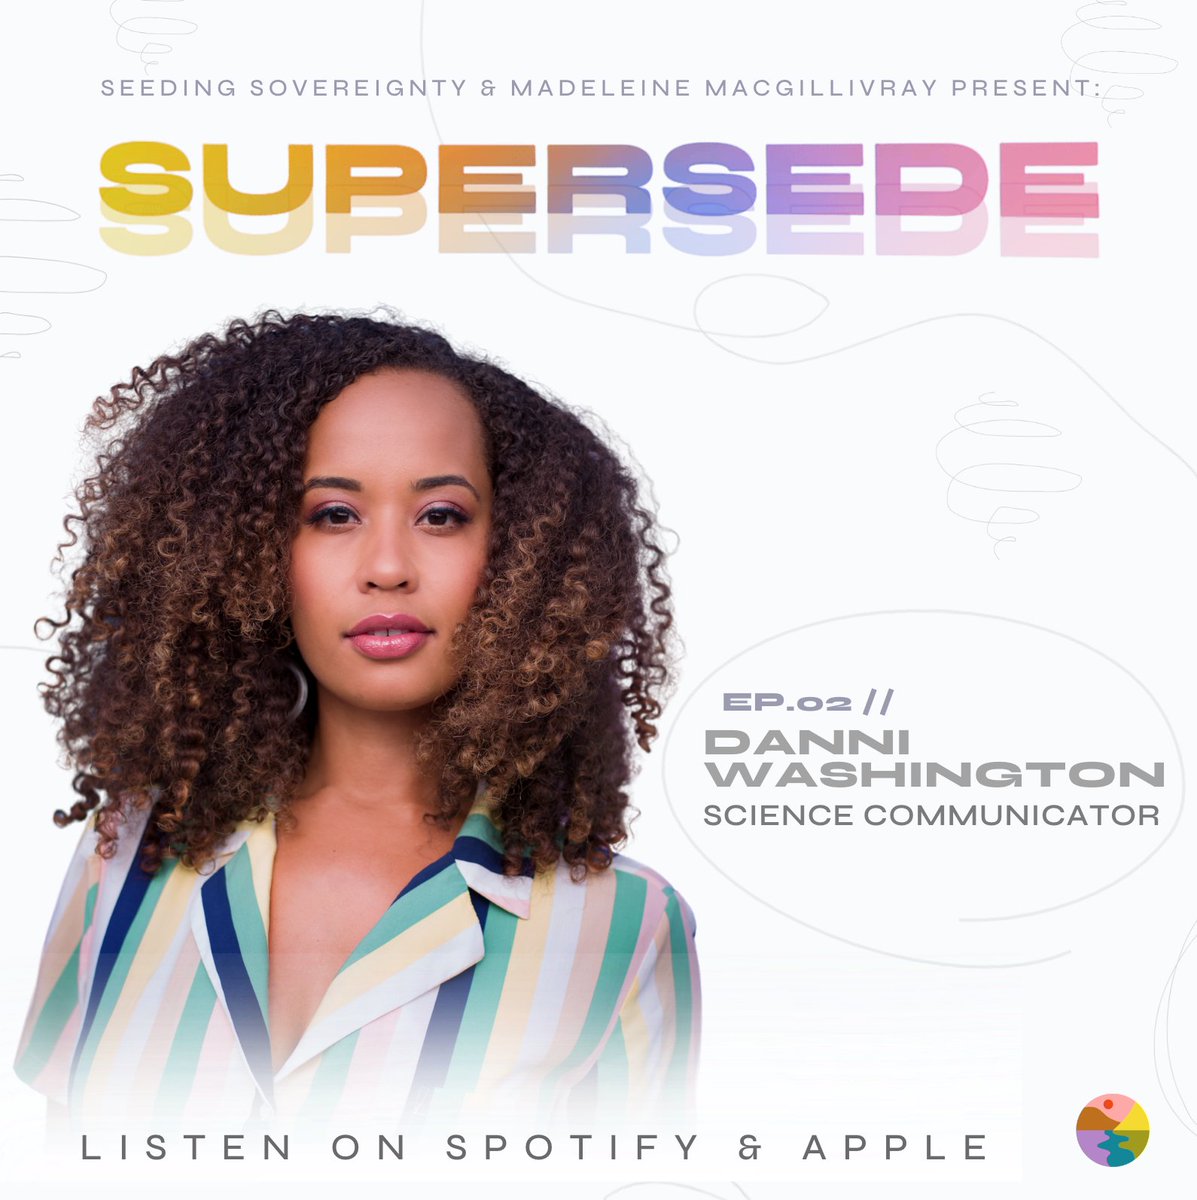 I'm the second guest ever on @SeedingSovereignty's new podcast, Supersede! Listen in as we discuss growing up as a Black woman in STEM without representation, the relationship between what we’re good at and what we love to do, and more! open.spotify.com/episode/6otTBs…